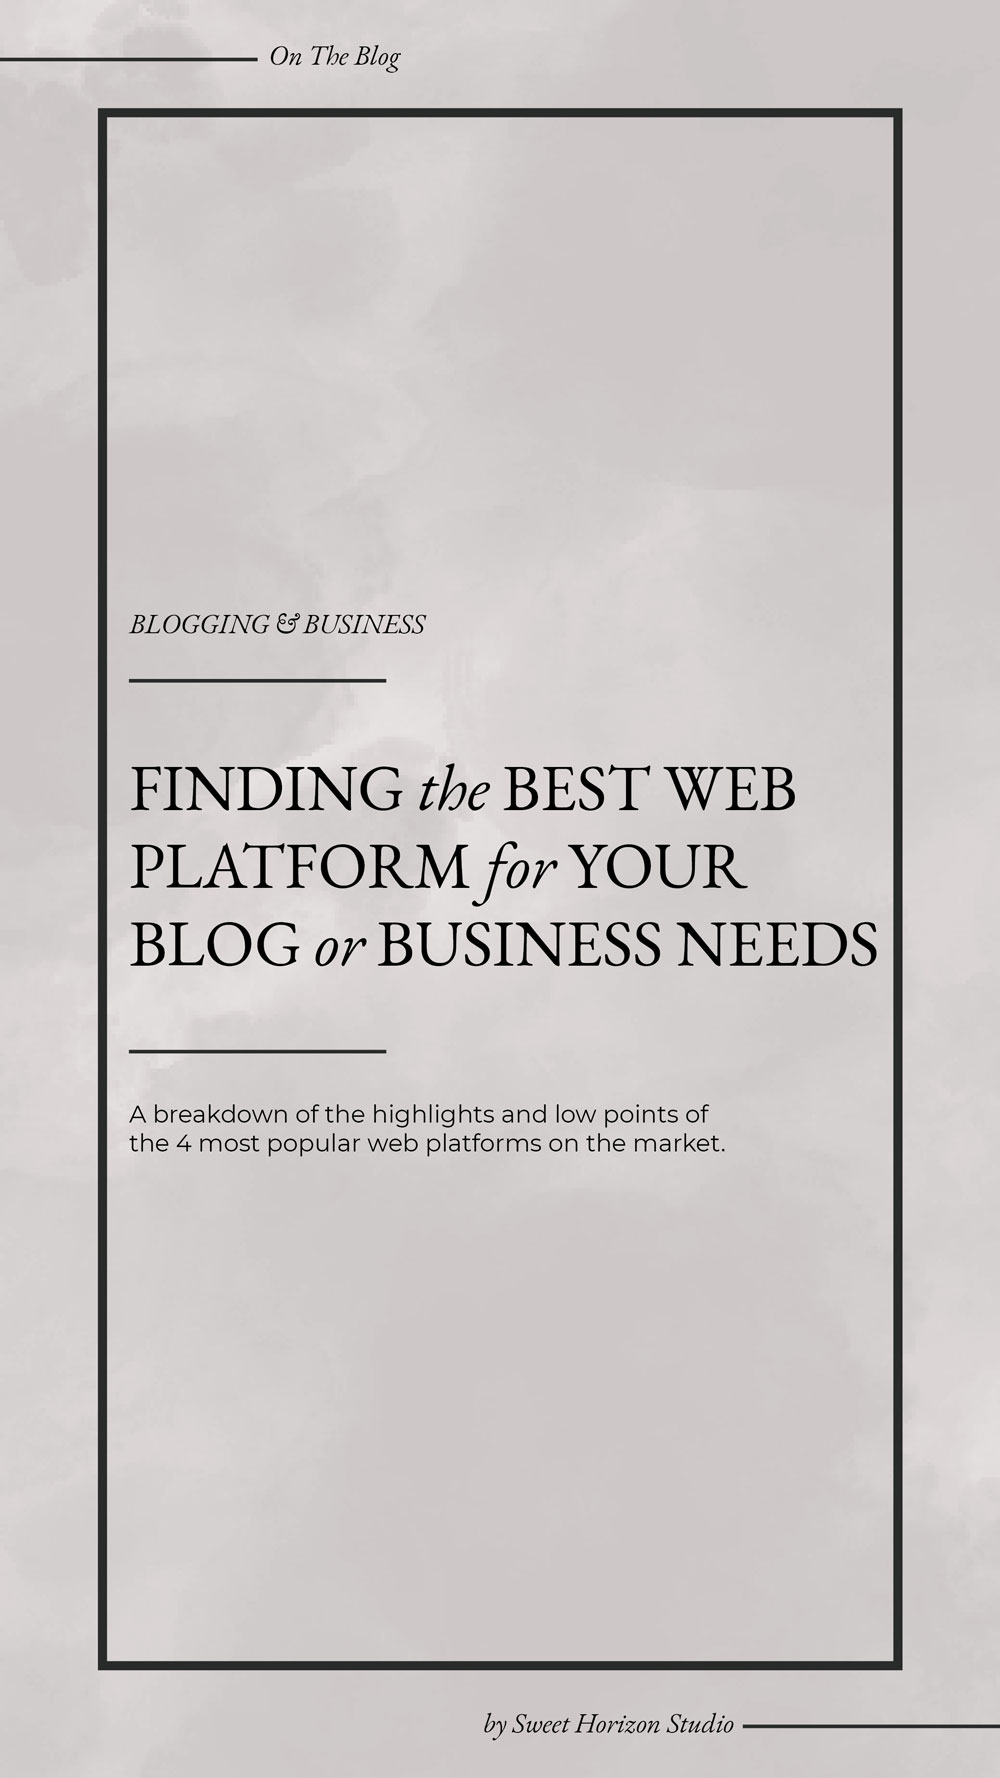 Finding the best web platform for your blog or business needs from www.sweethorizonblog.com